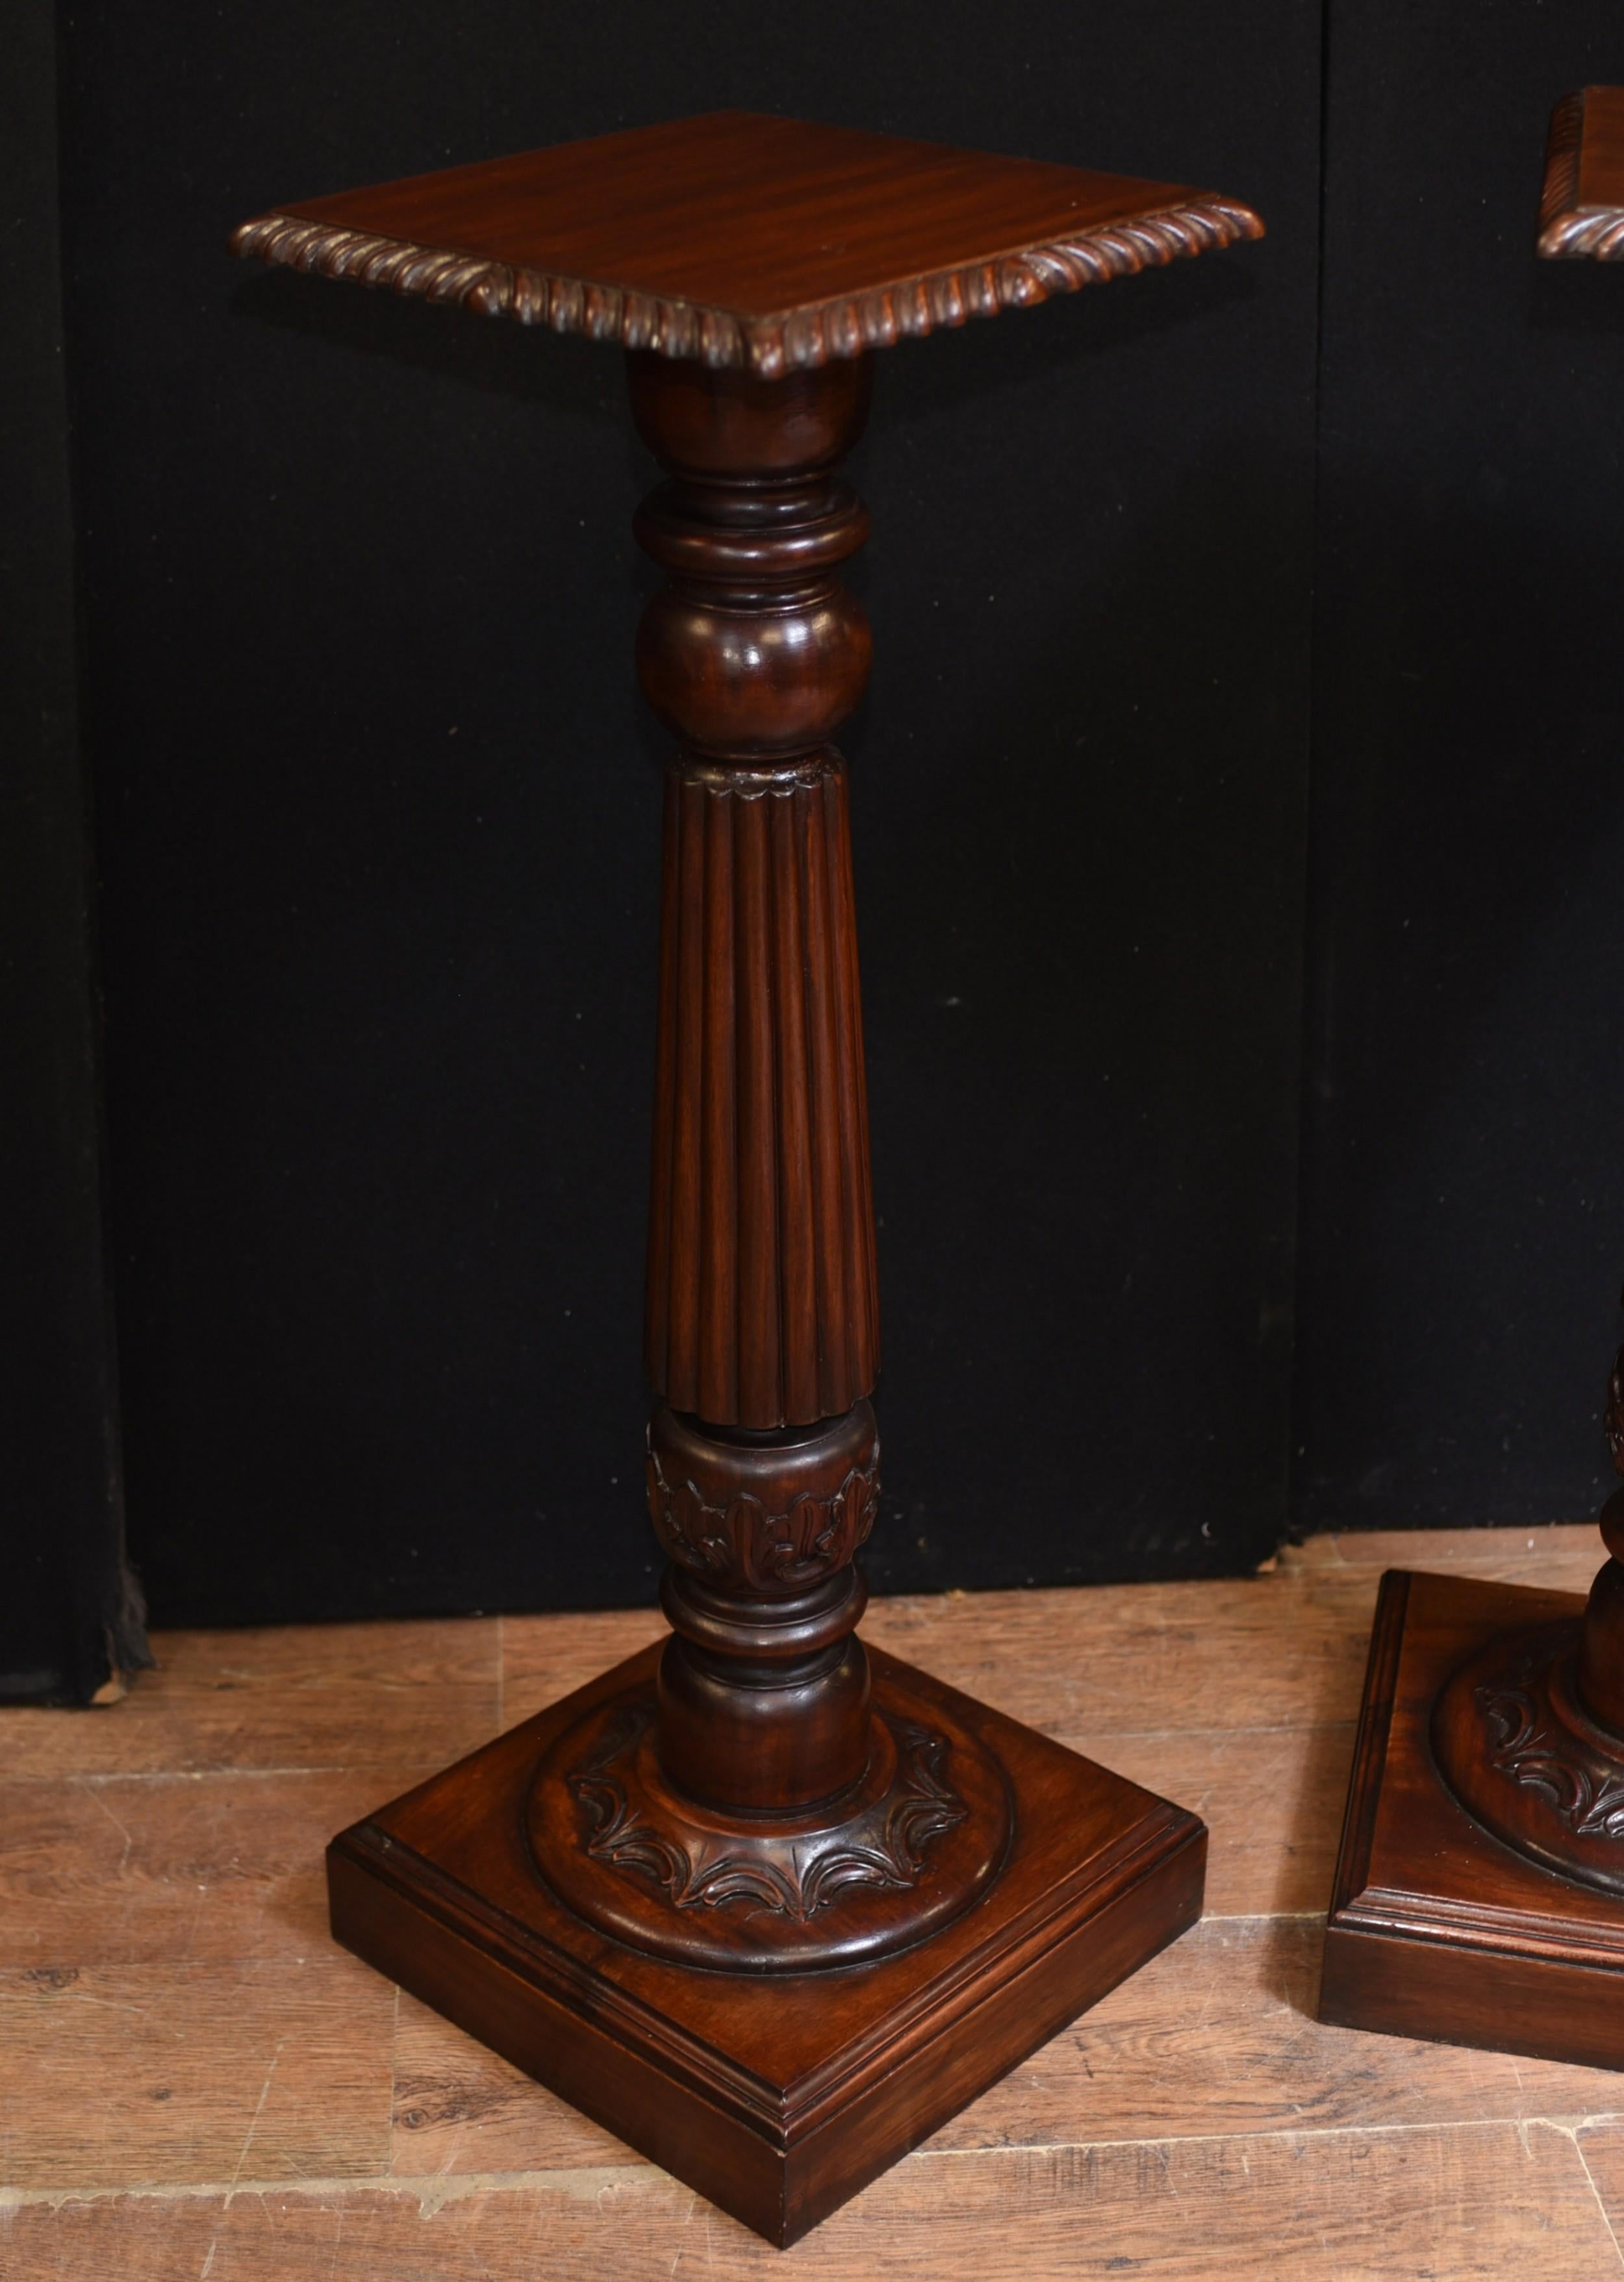 Regency Column Tables, Mahogany Pedestal In Good Condition For Sale In Potters Bar, GB